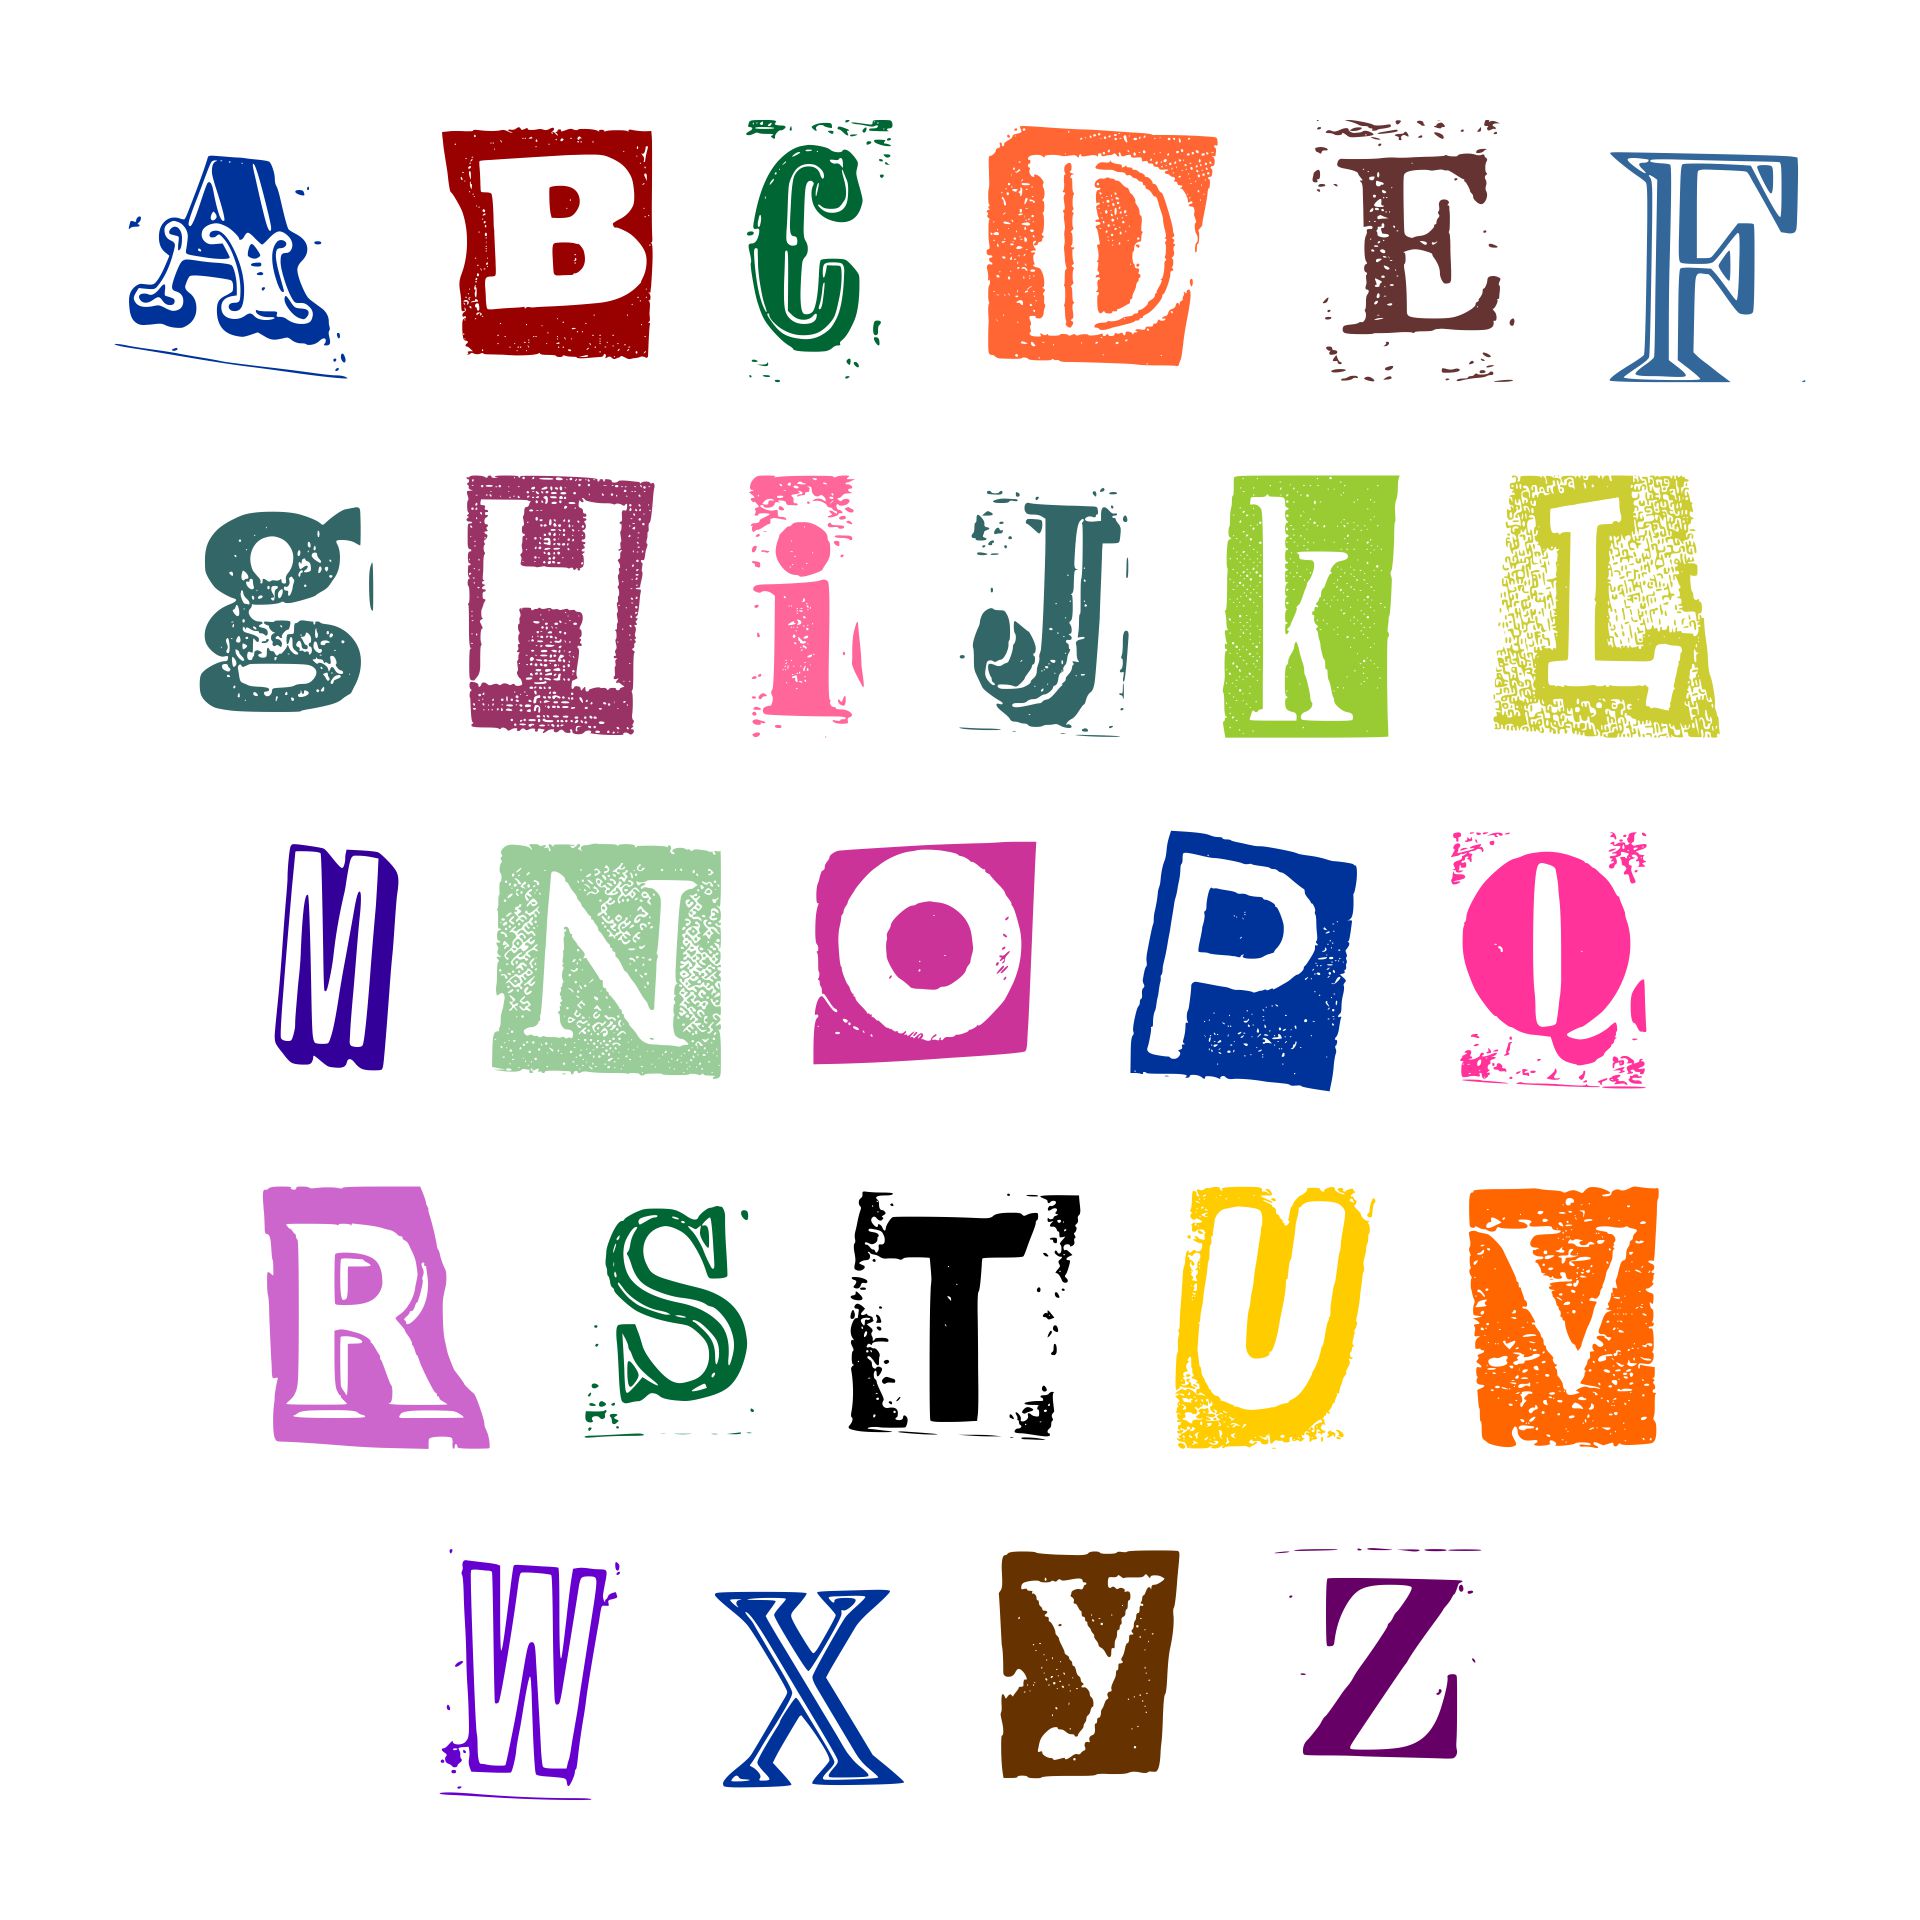 6-best-images-of-printable-cut-out-letters-free-cut-out-7-best-images